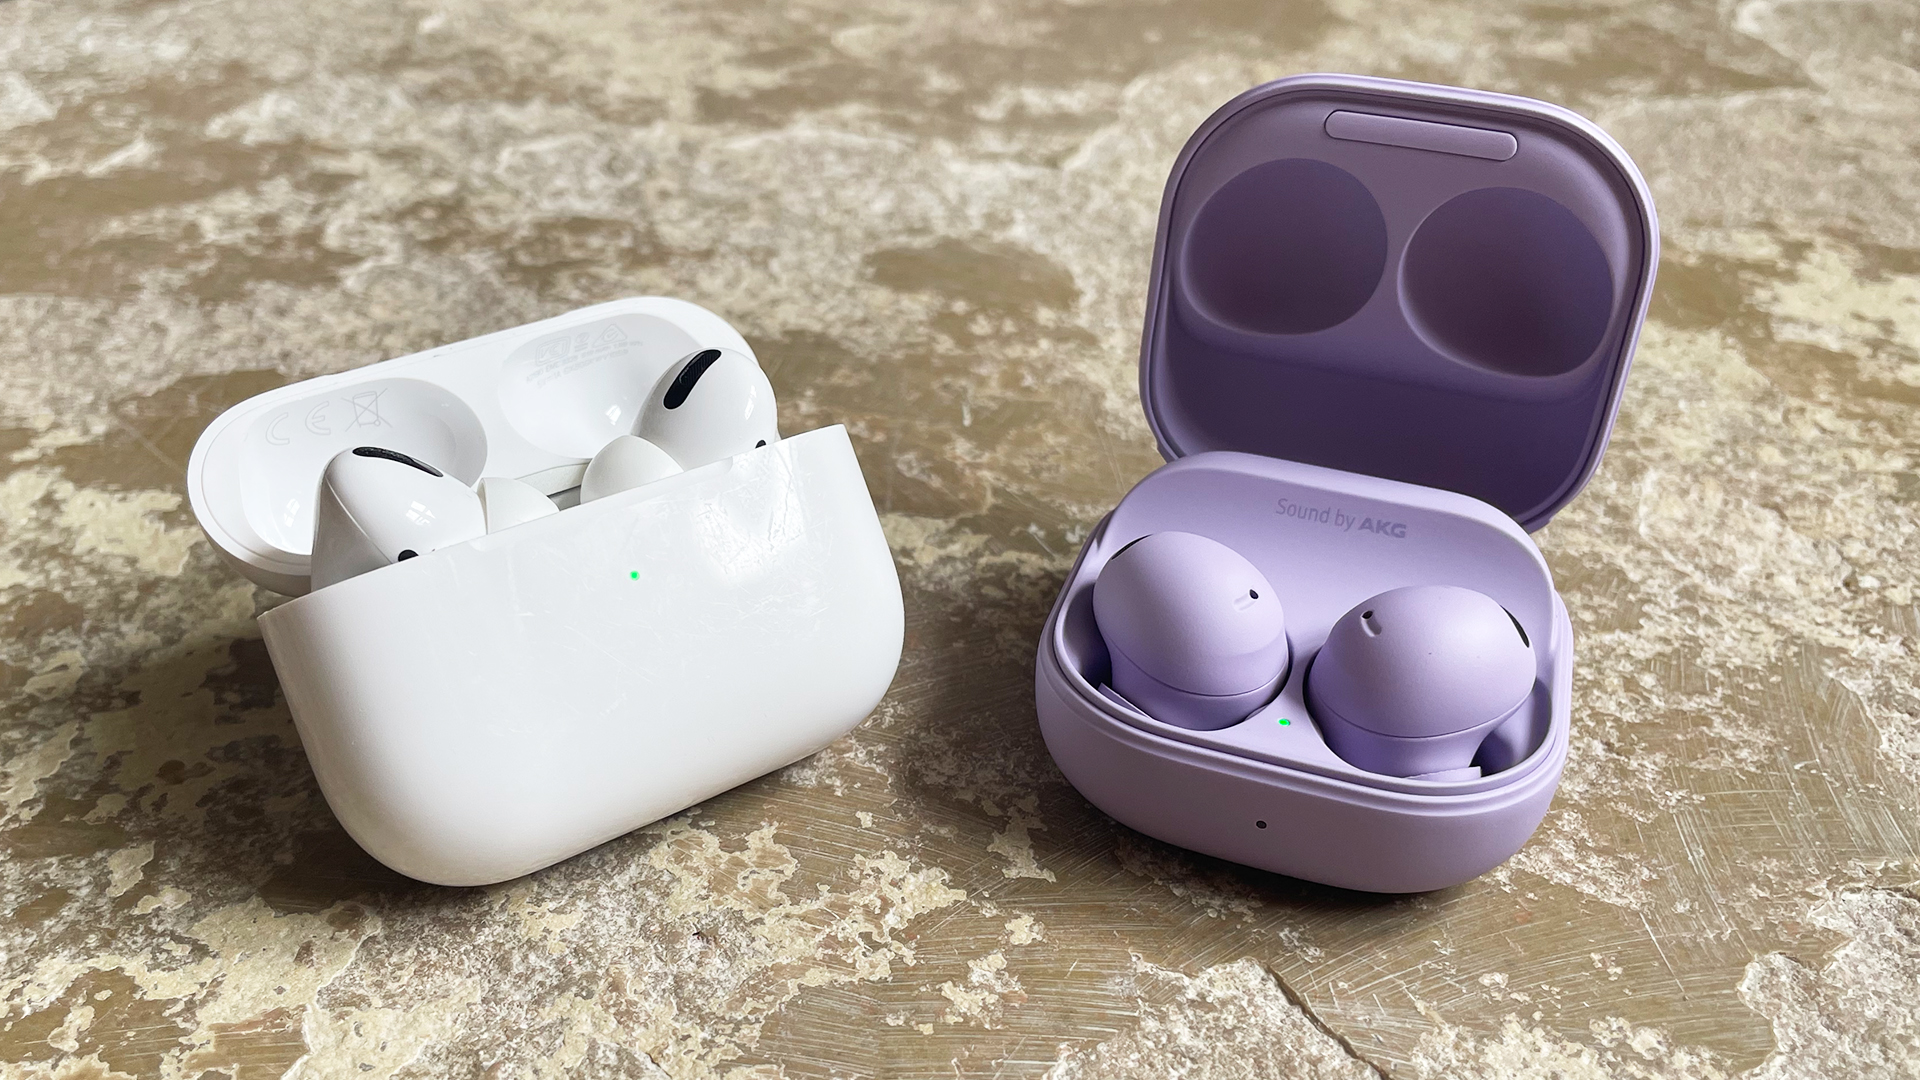 Apple Airpods Pro vs Samsung Galaxy Buds Pro: Which Pro is best